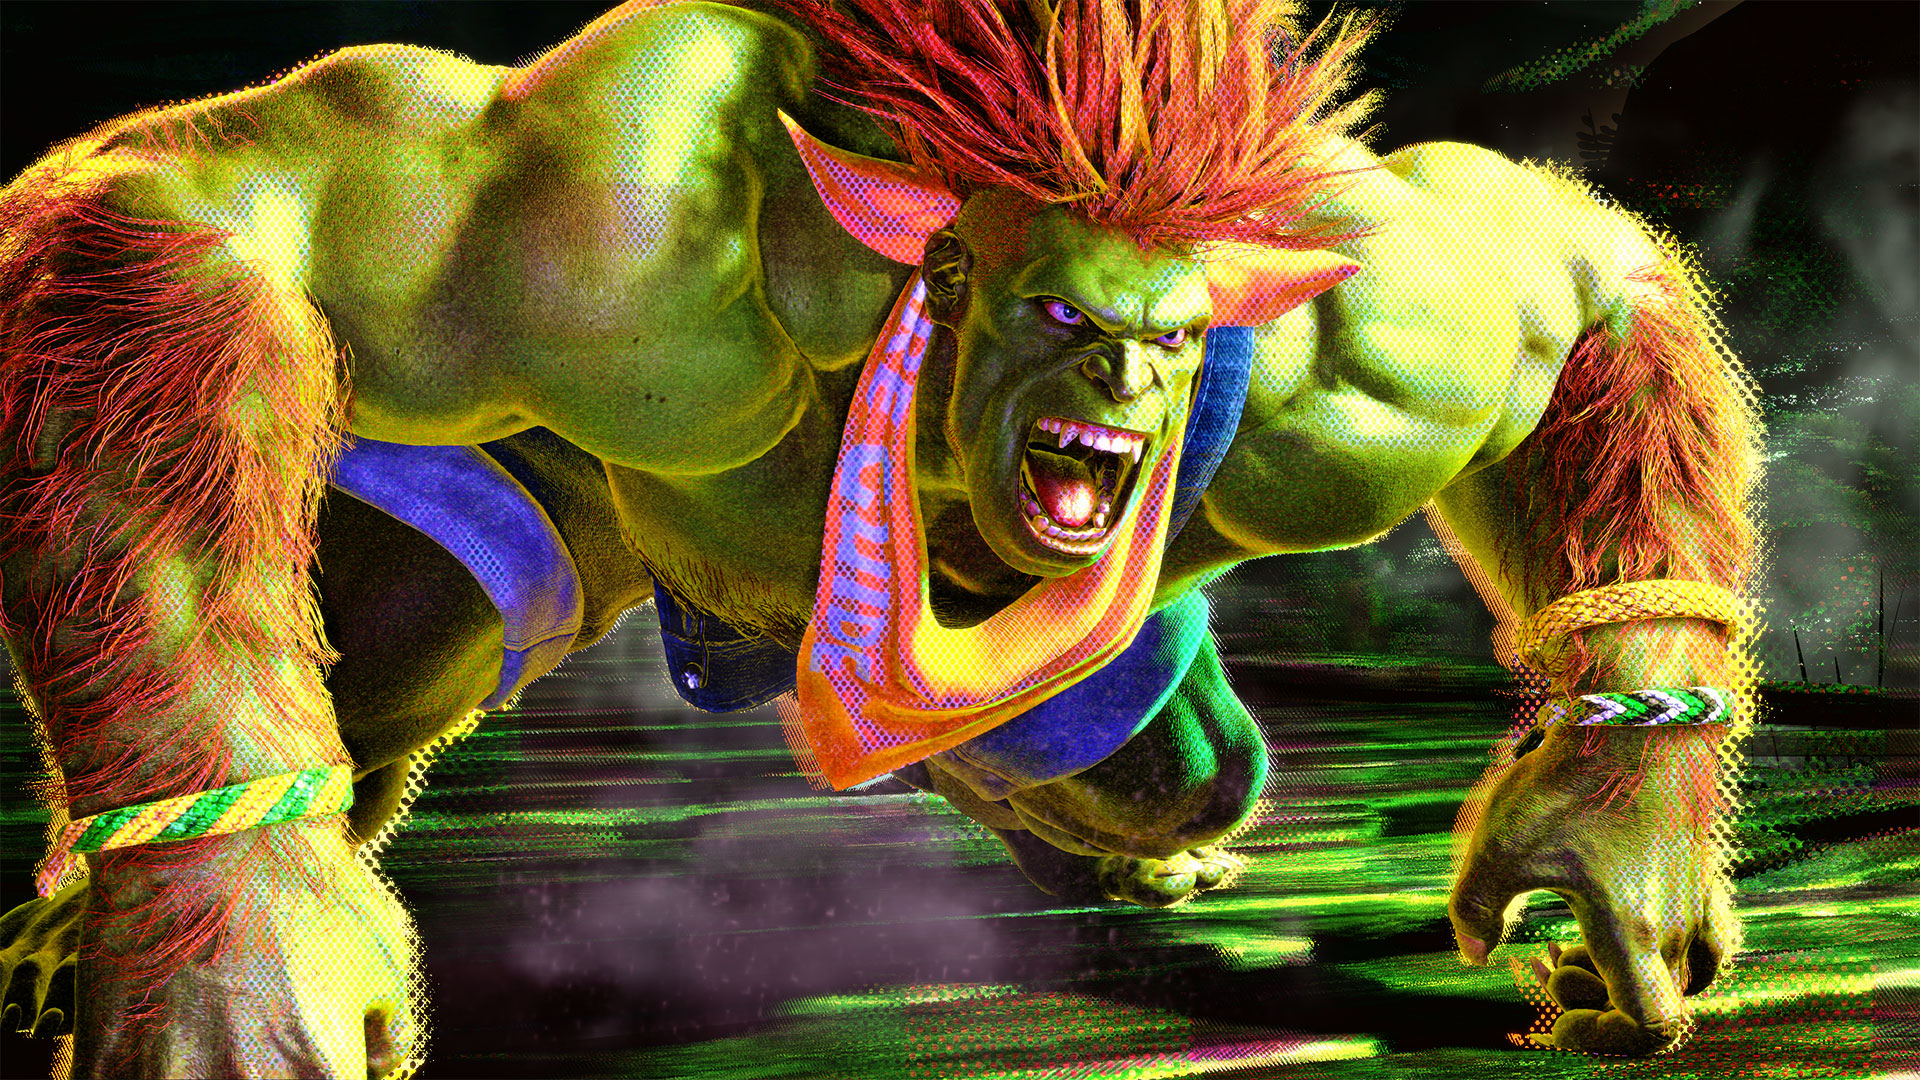 Street Fighter 6 - Official Blanka Overview Trailer - IGN